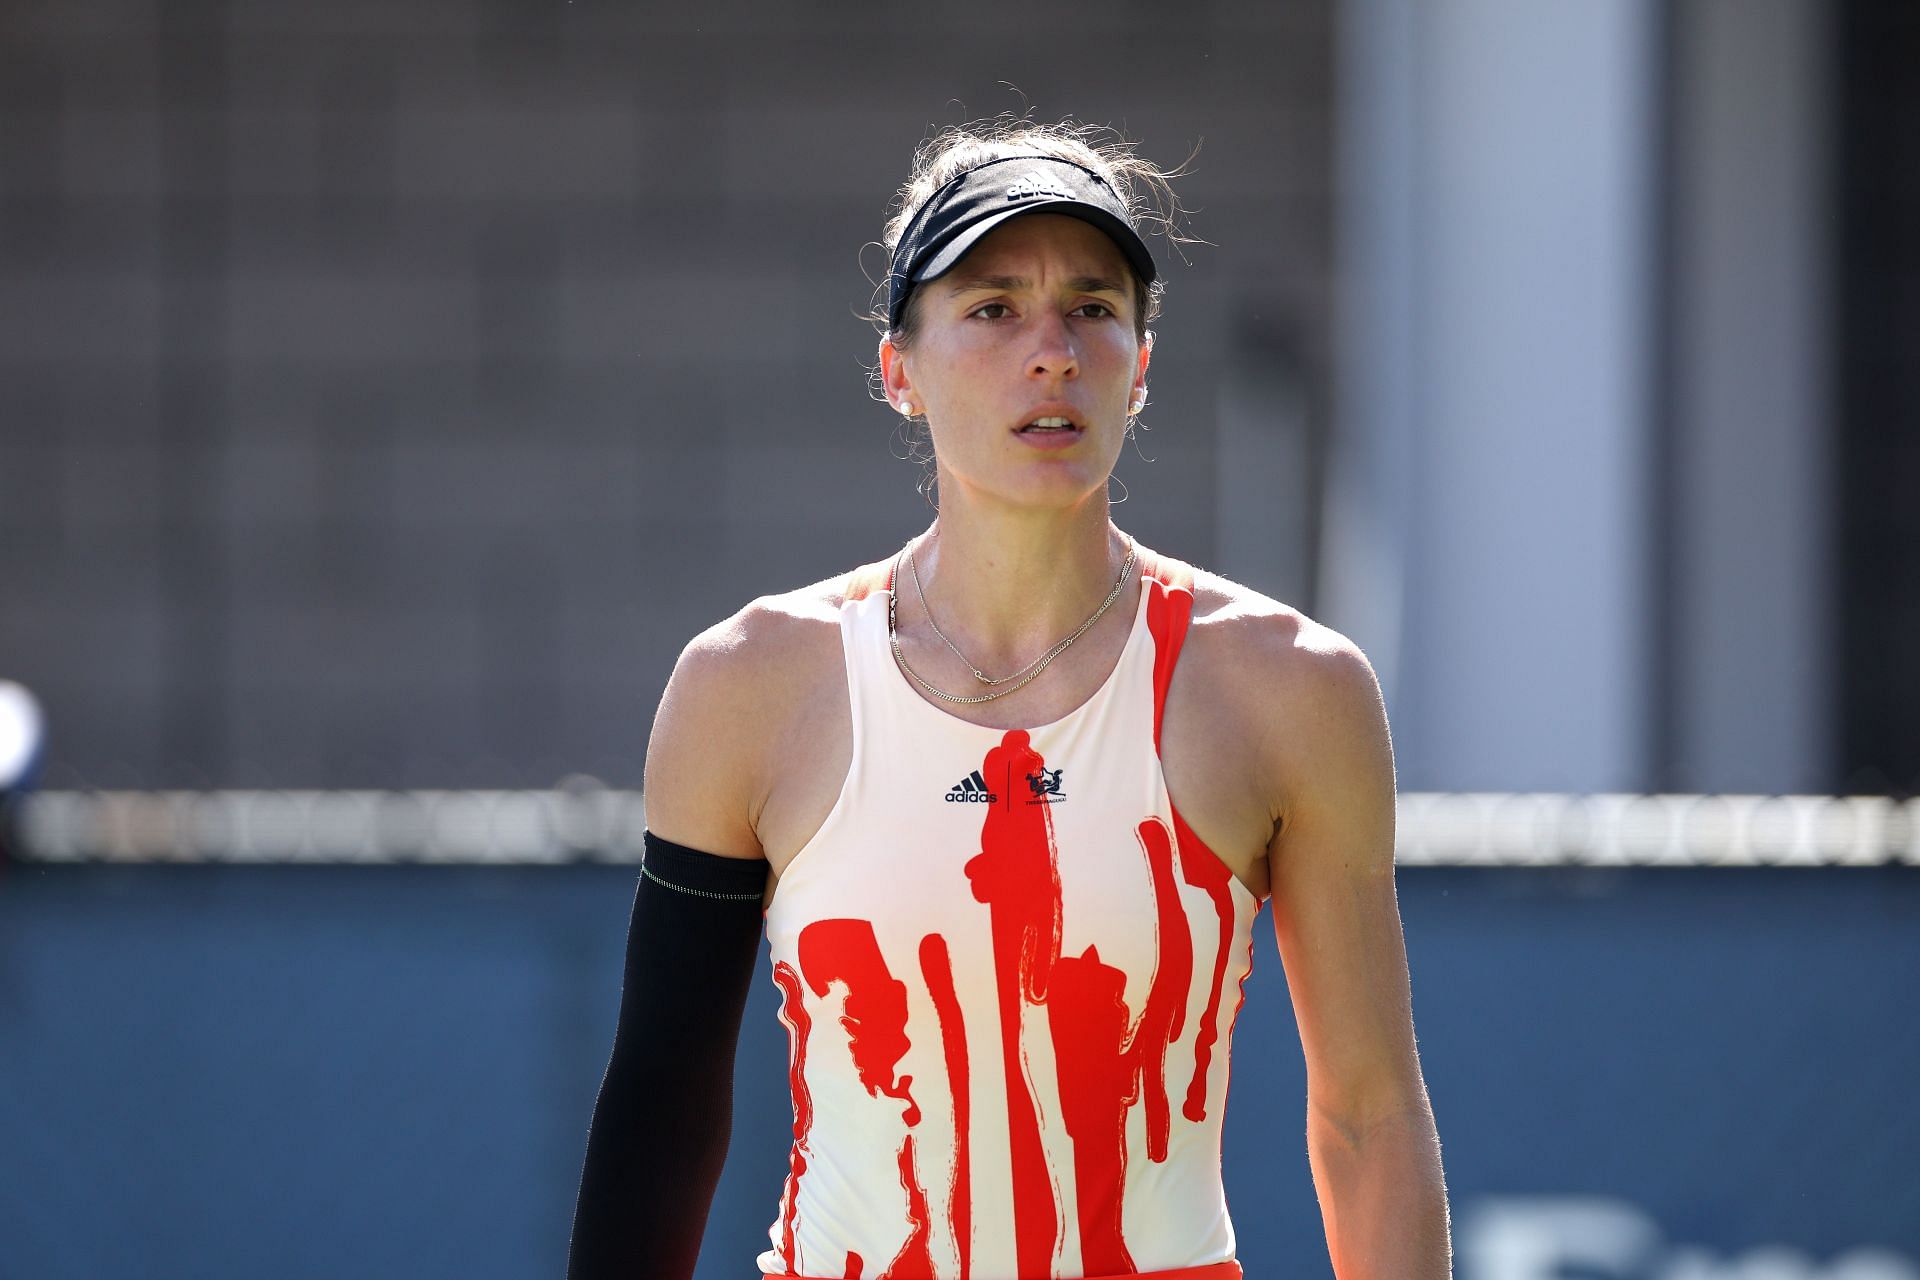 Andrea Petkovic at the 2022 US Open.